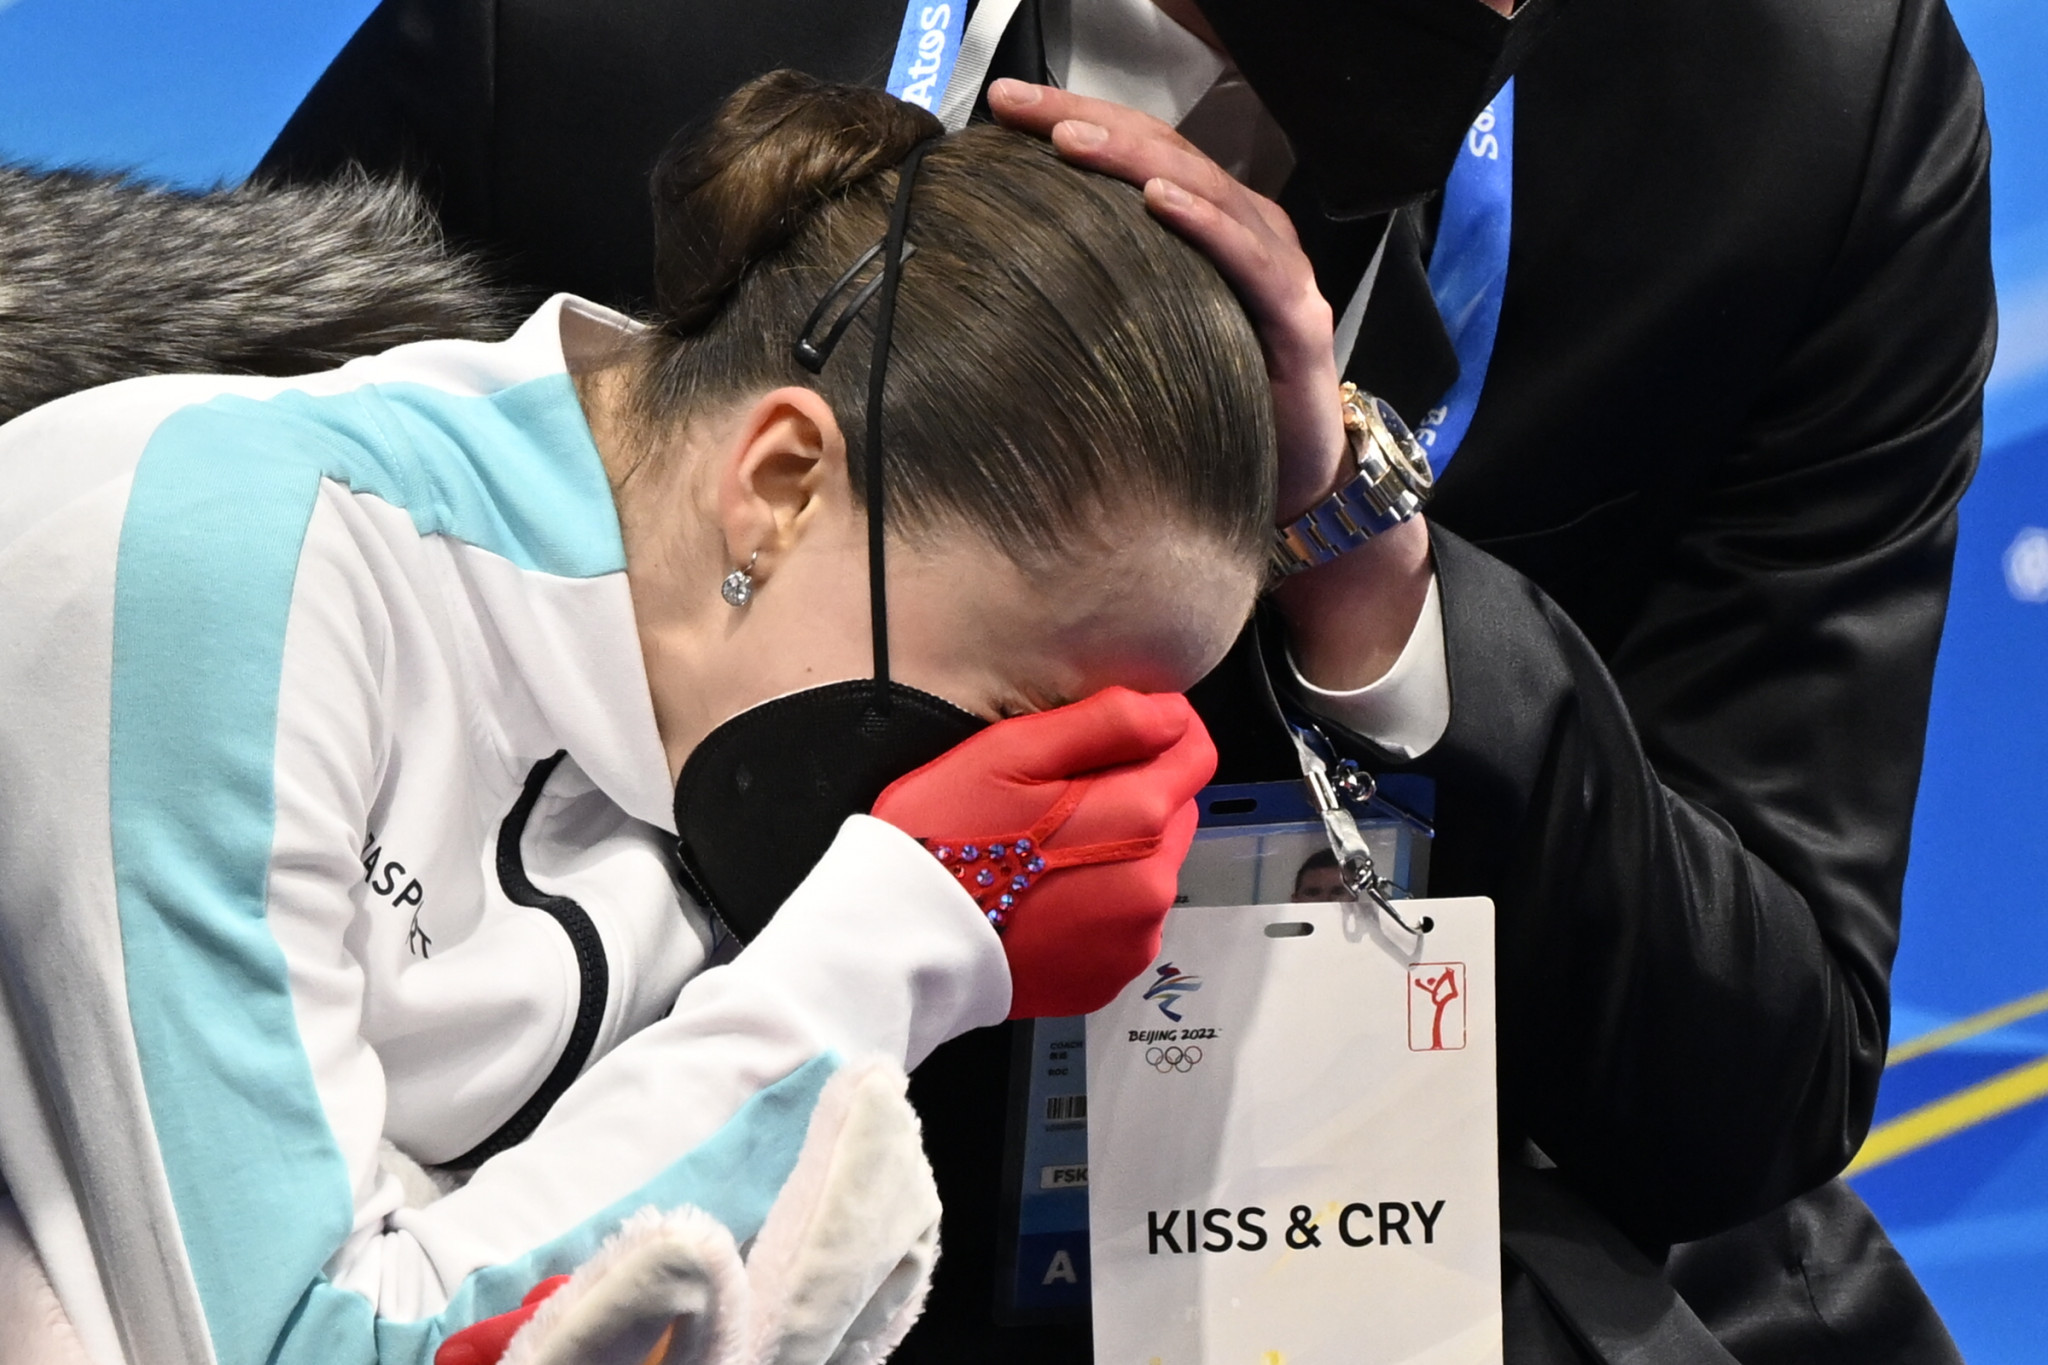 The story of the Winter Olympics, broken by insidethegames, turned out to be a positive drugs test involving 15-year-old Russian skater Kamila Valieva ©Getty Images